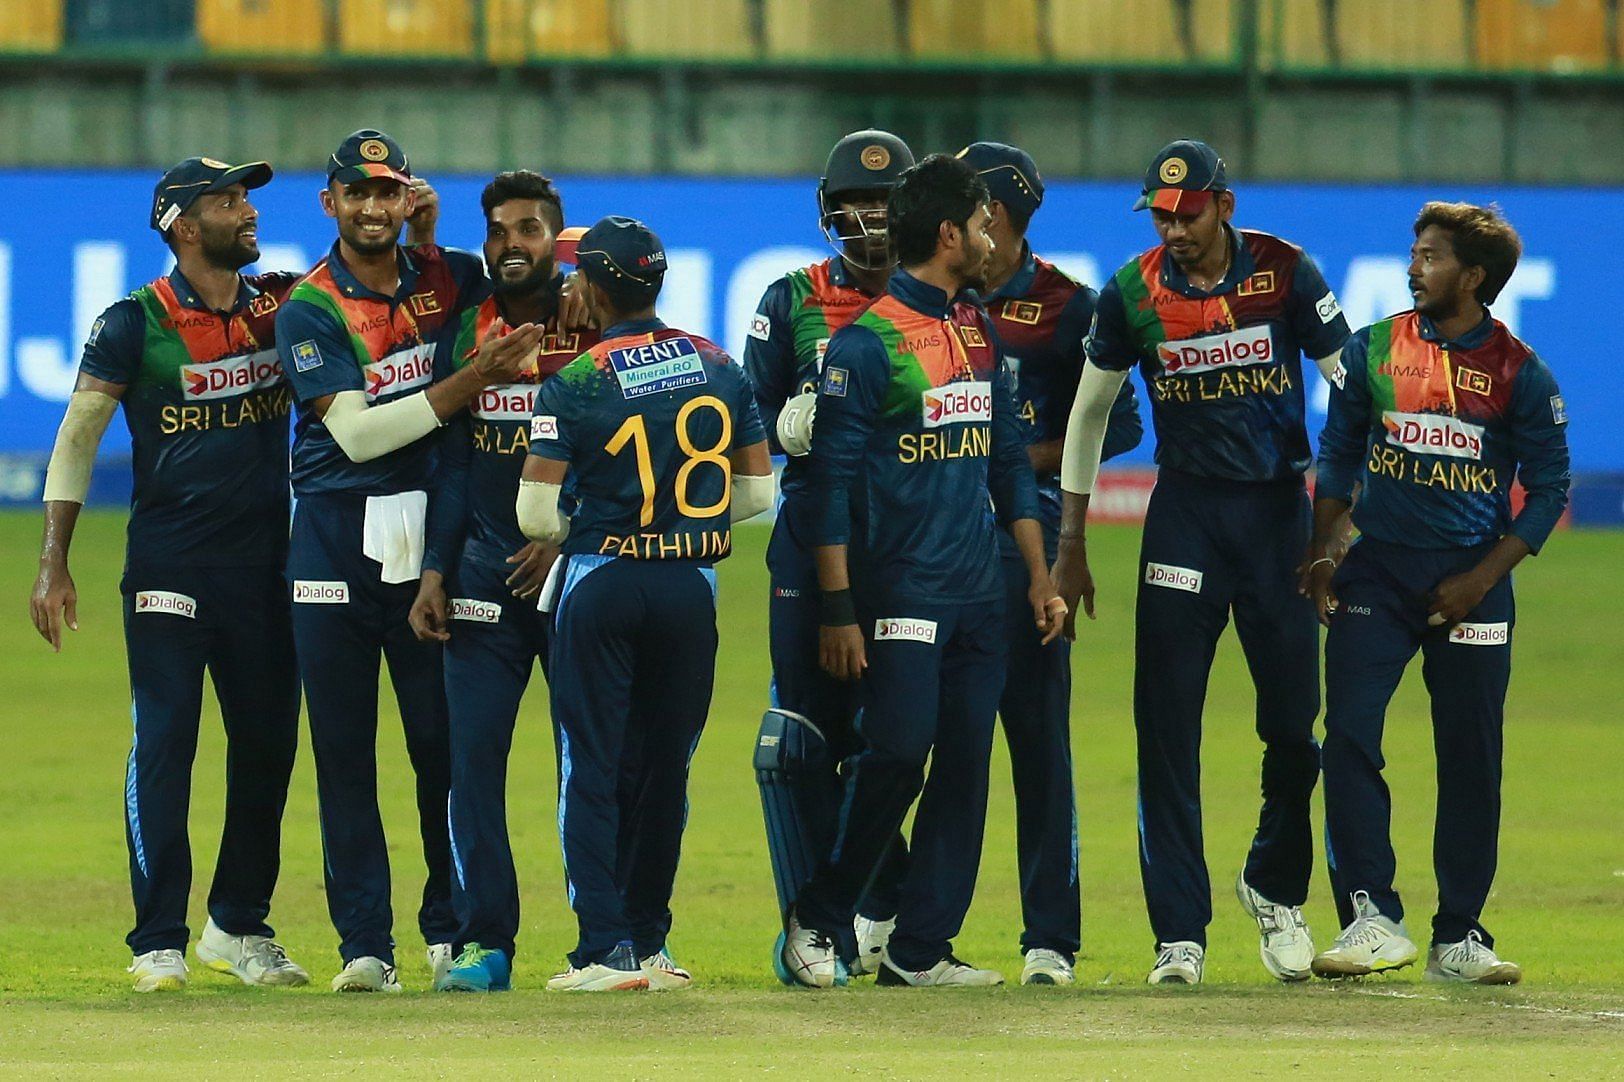 How will the Sri Lankans fare in the T20 World Cup?